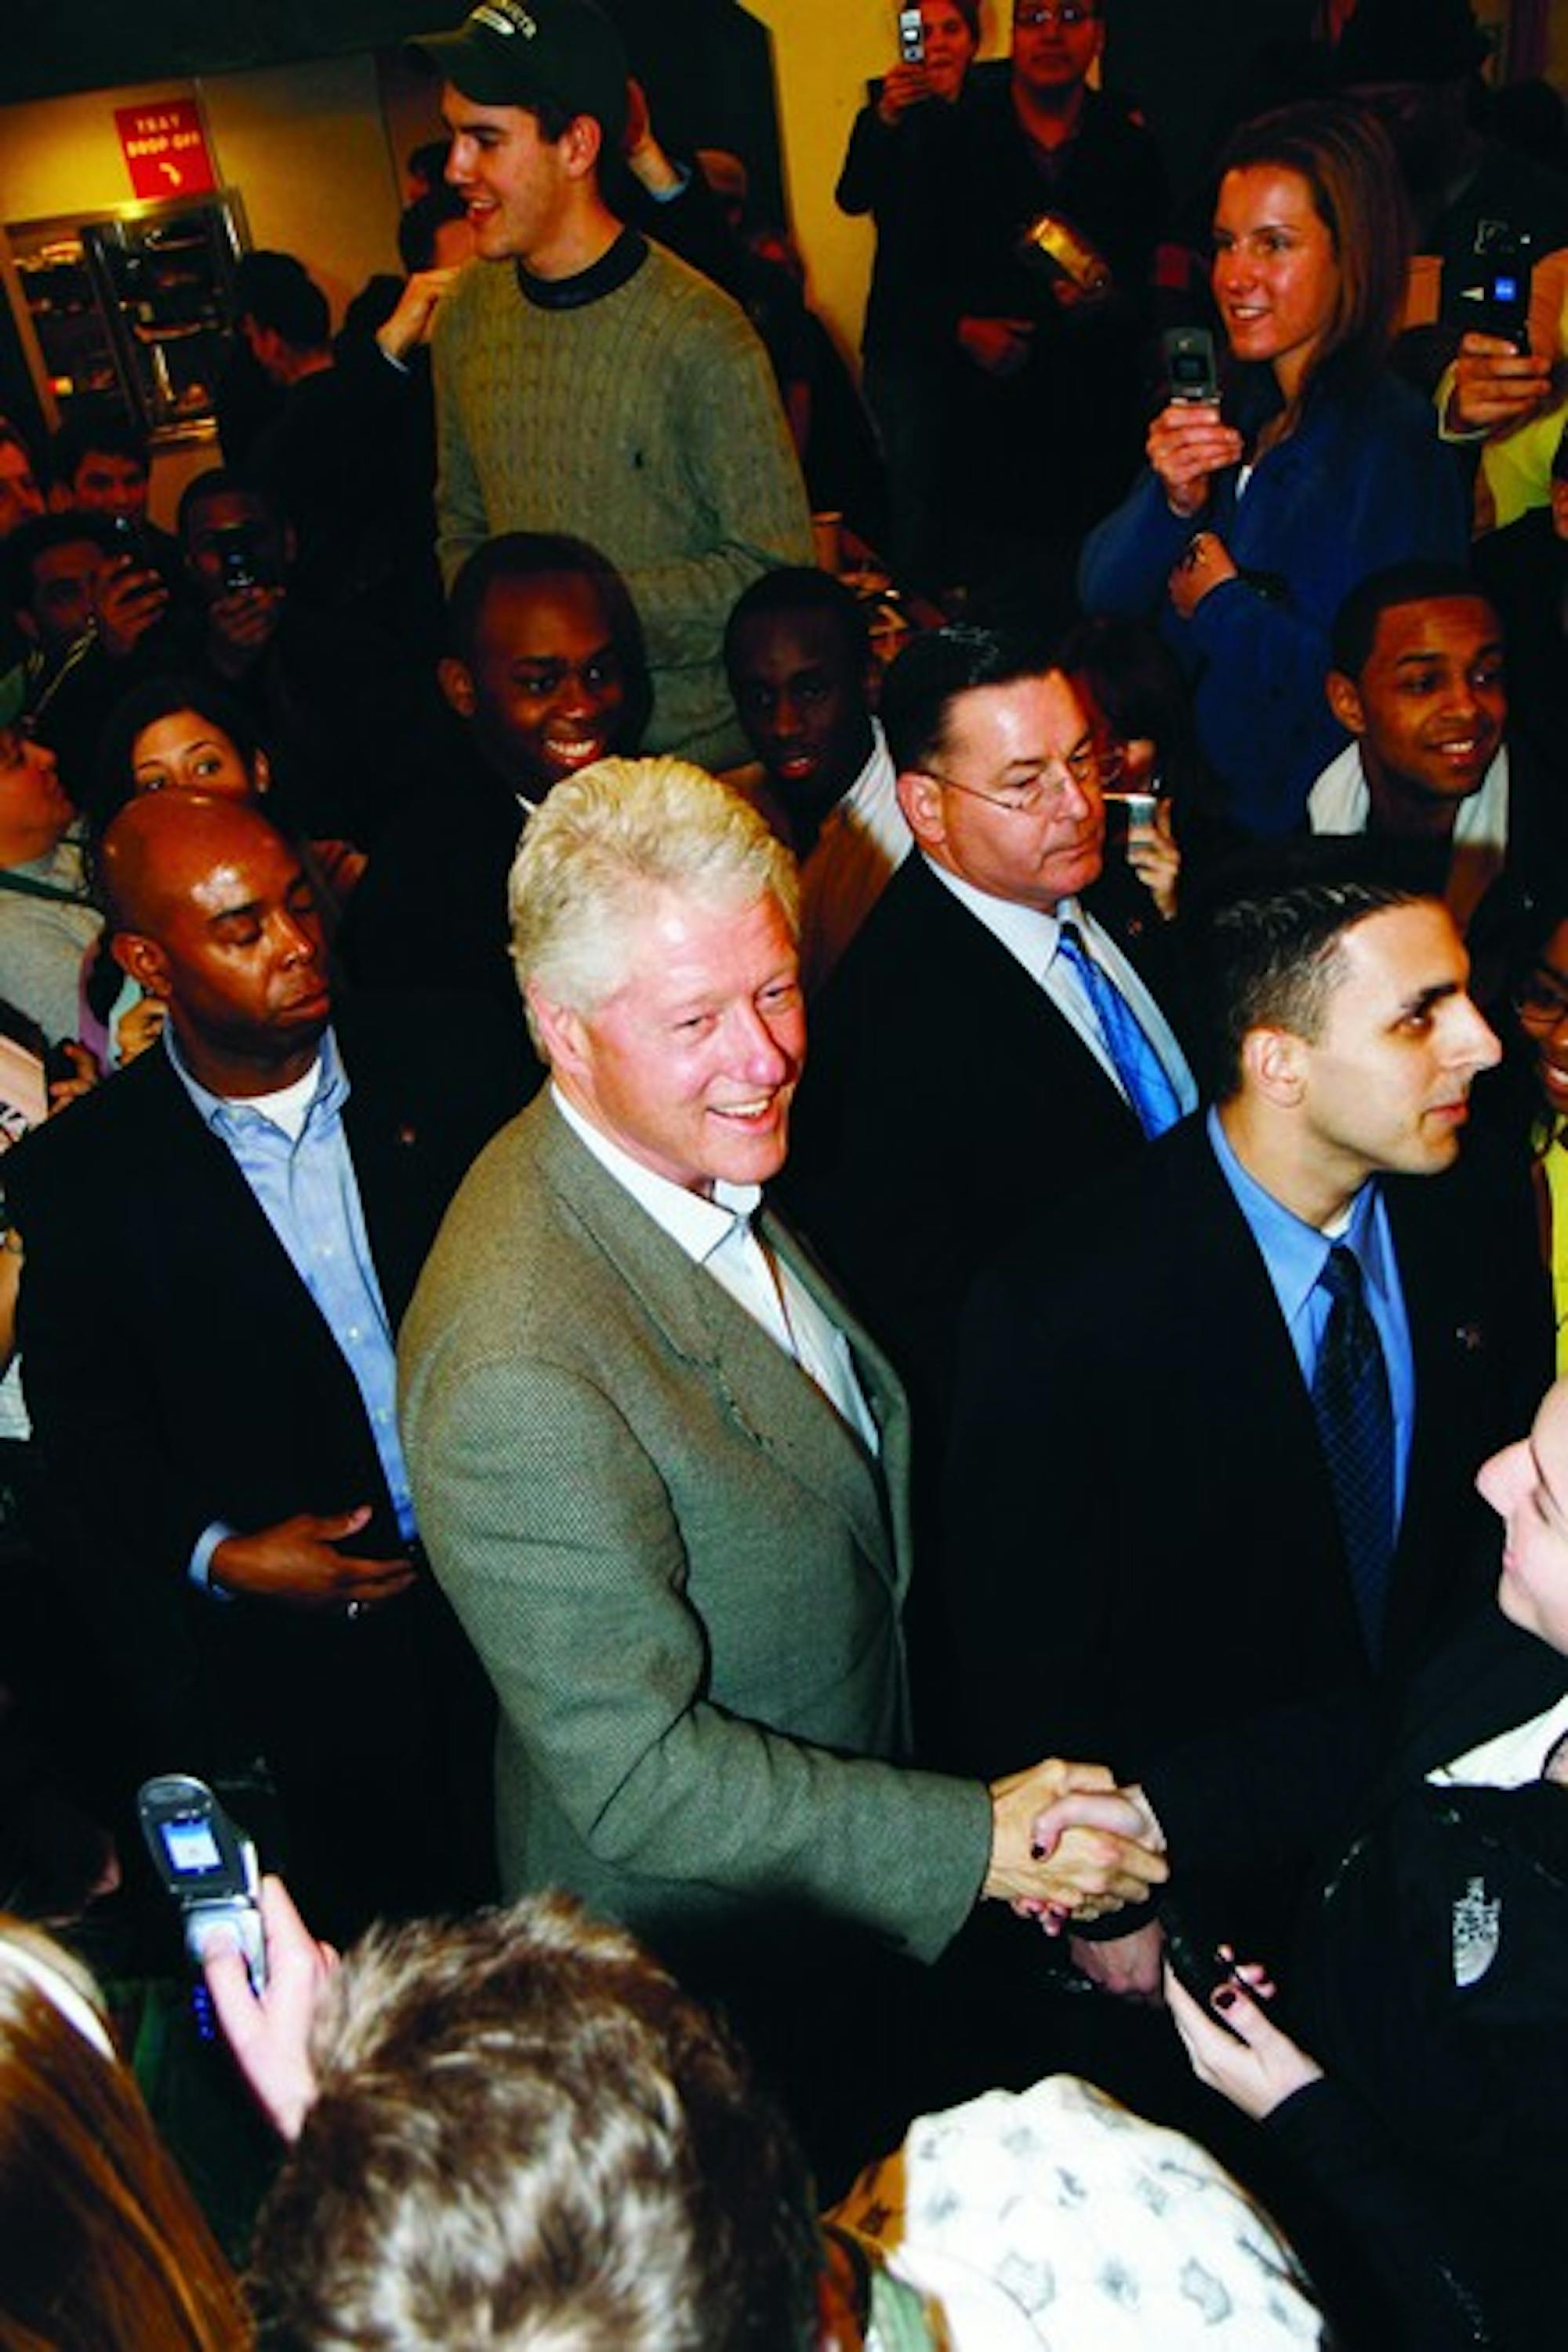 Former President Bill Clinton greets students during an impromptu visit to Food Court following his Monday speech in support of wife Hillary.